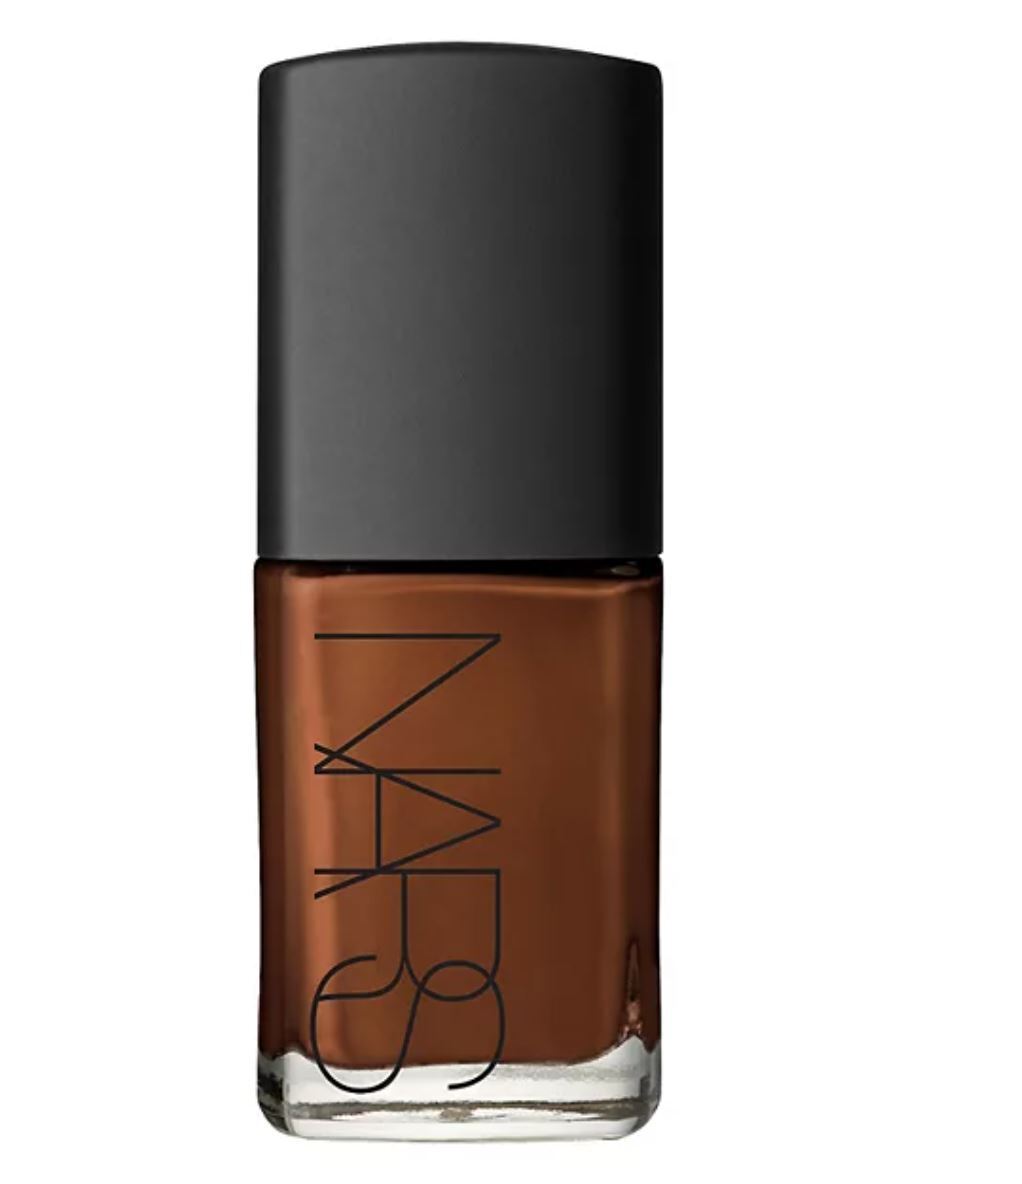 NARS Sheer Glow Foundation (Select Your Shade) MSRP $47